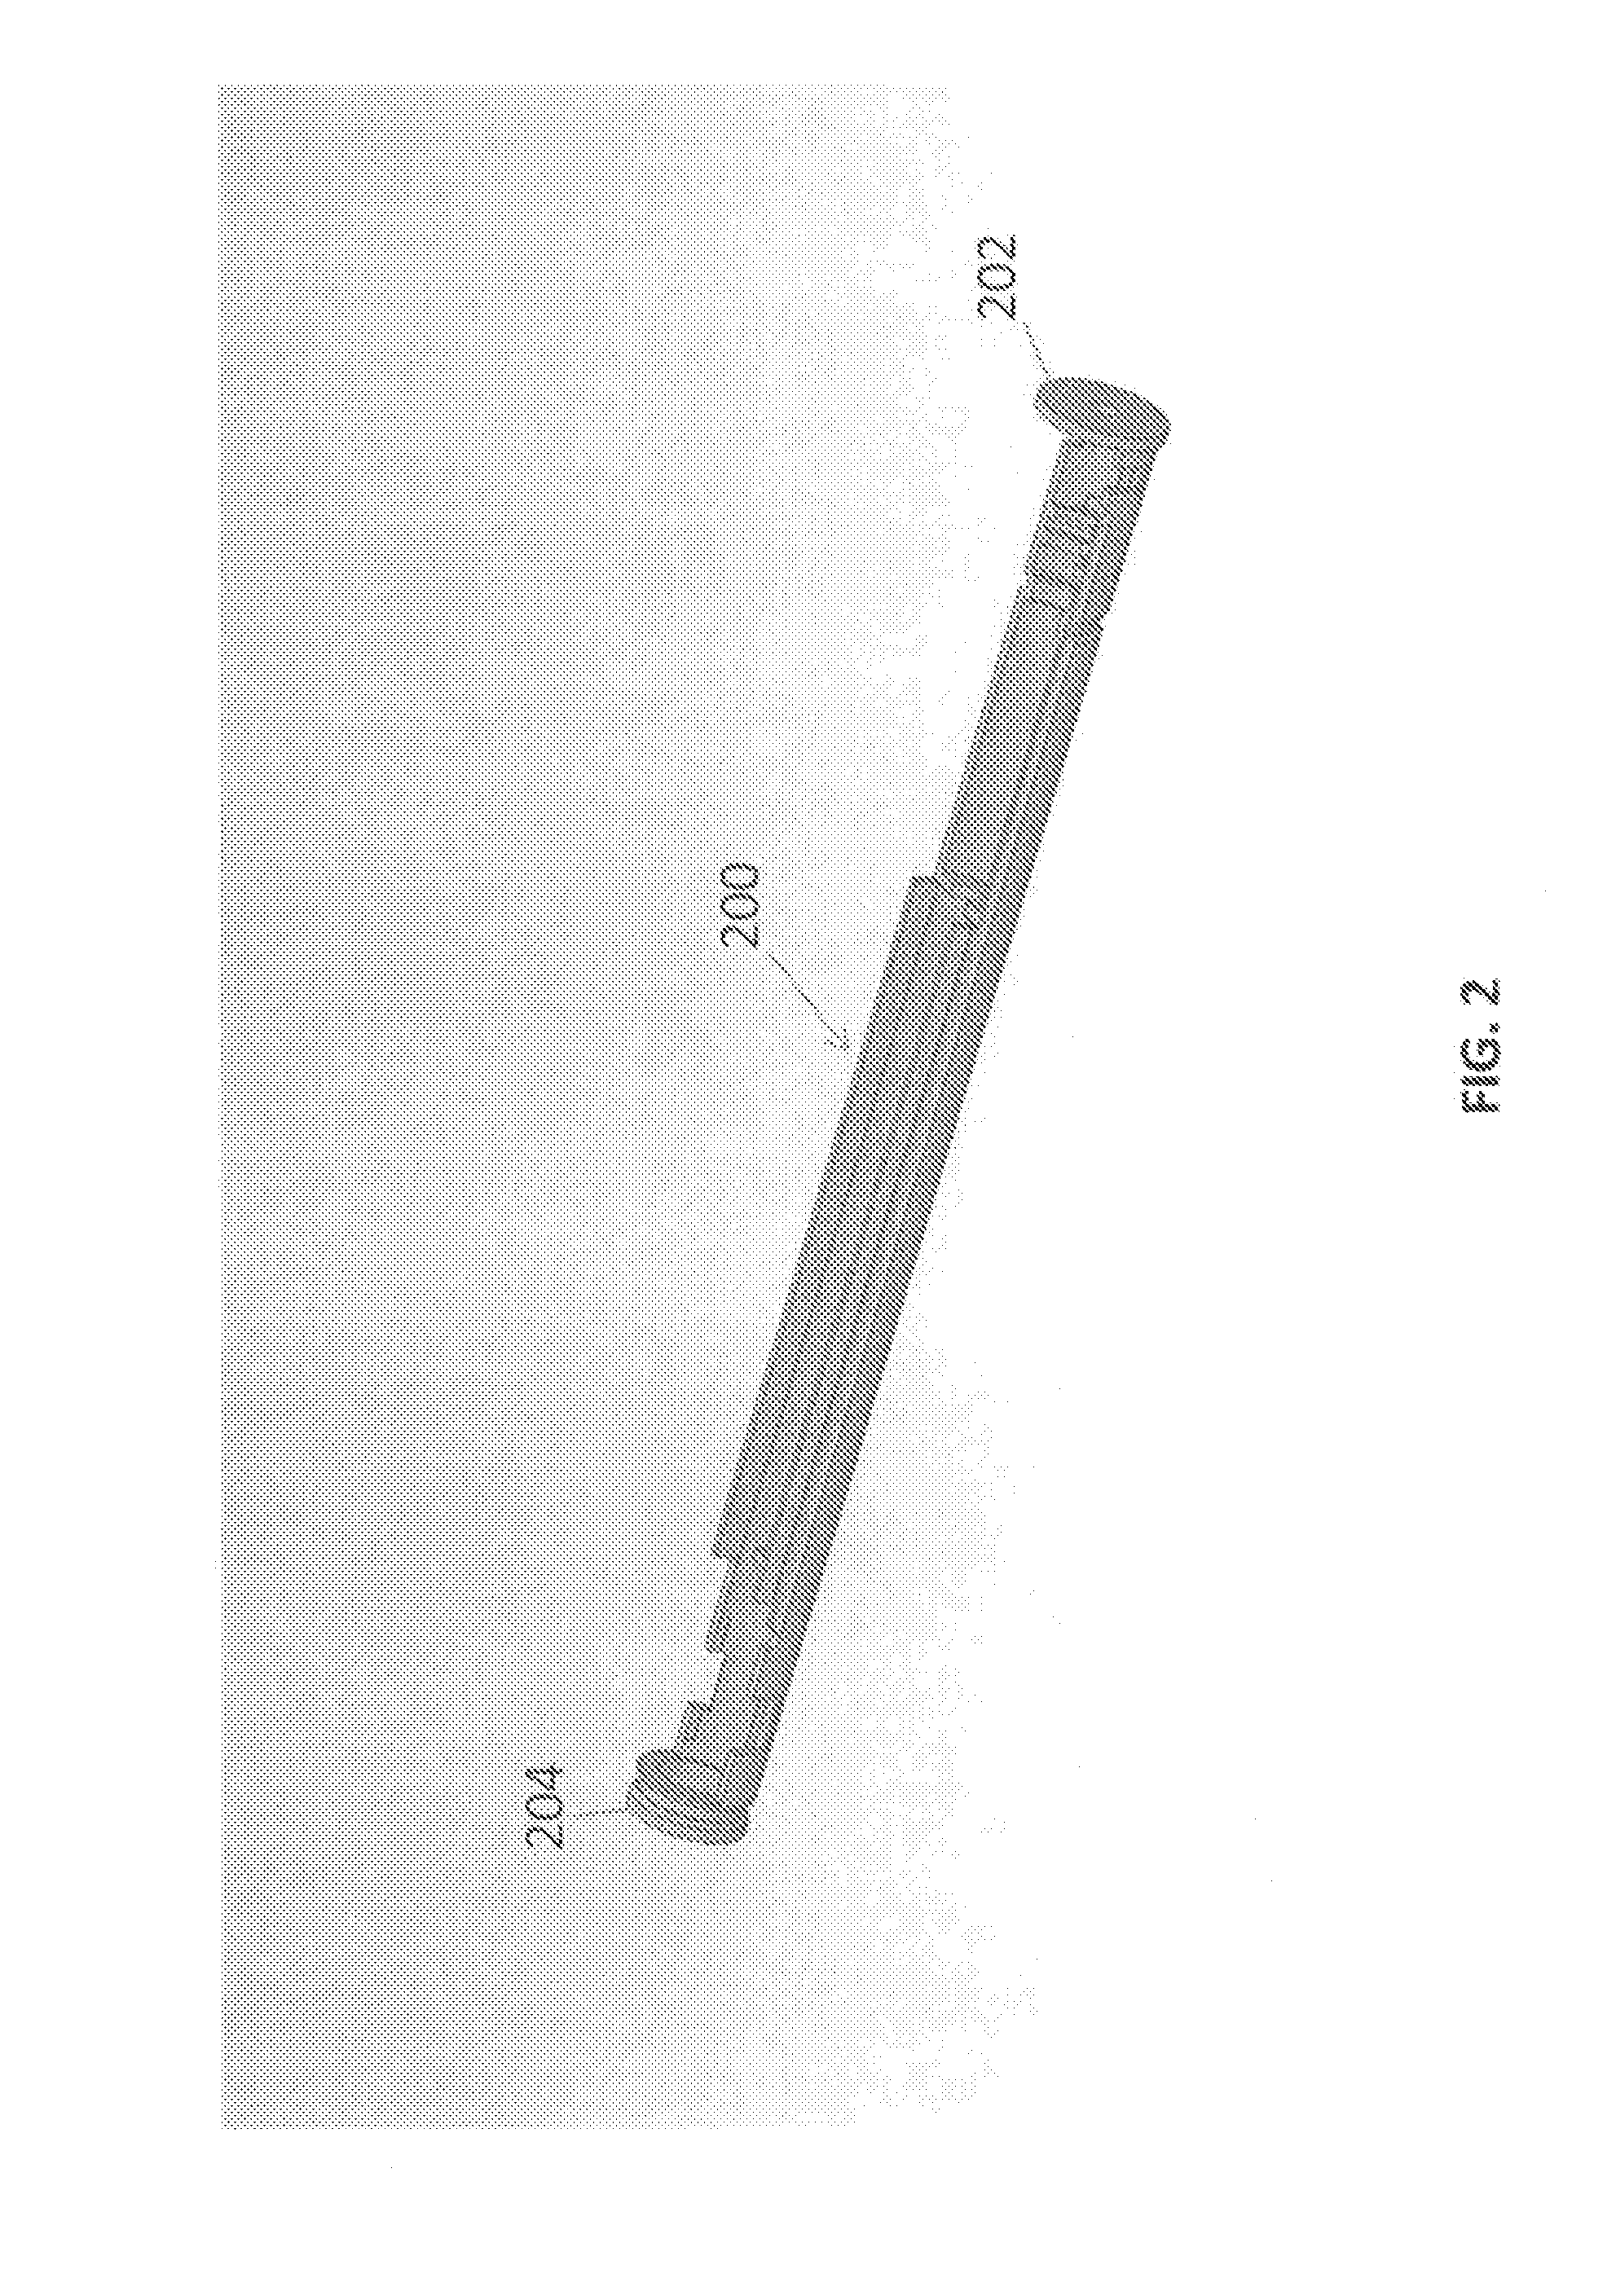 Electronic smoking device configured for automated assembly